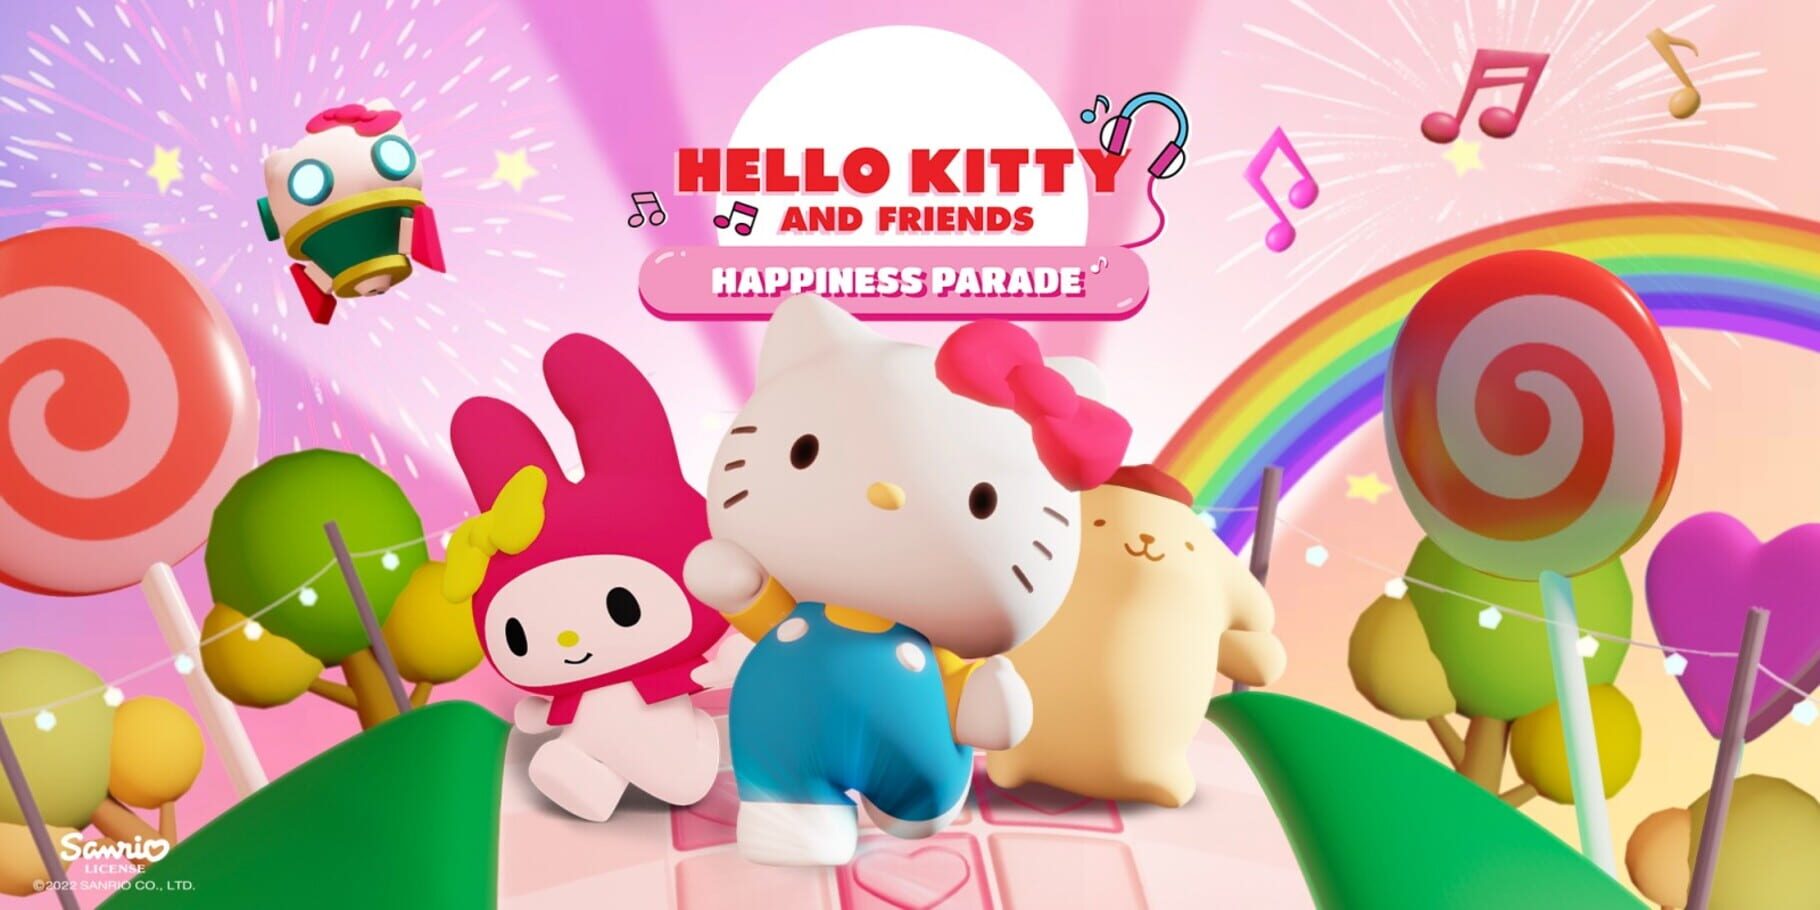 Arte - Hello Kitty and Friends: Happiness Parade